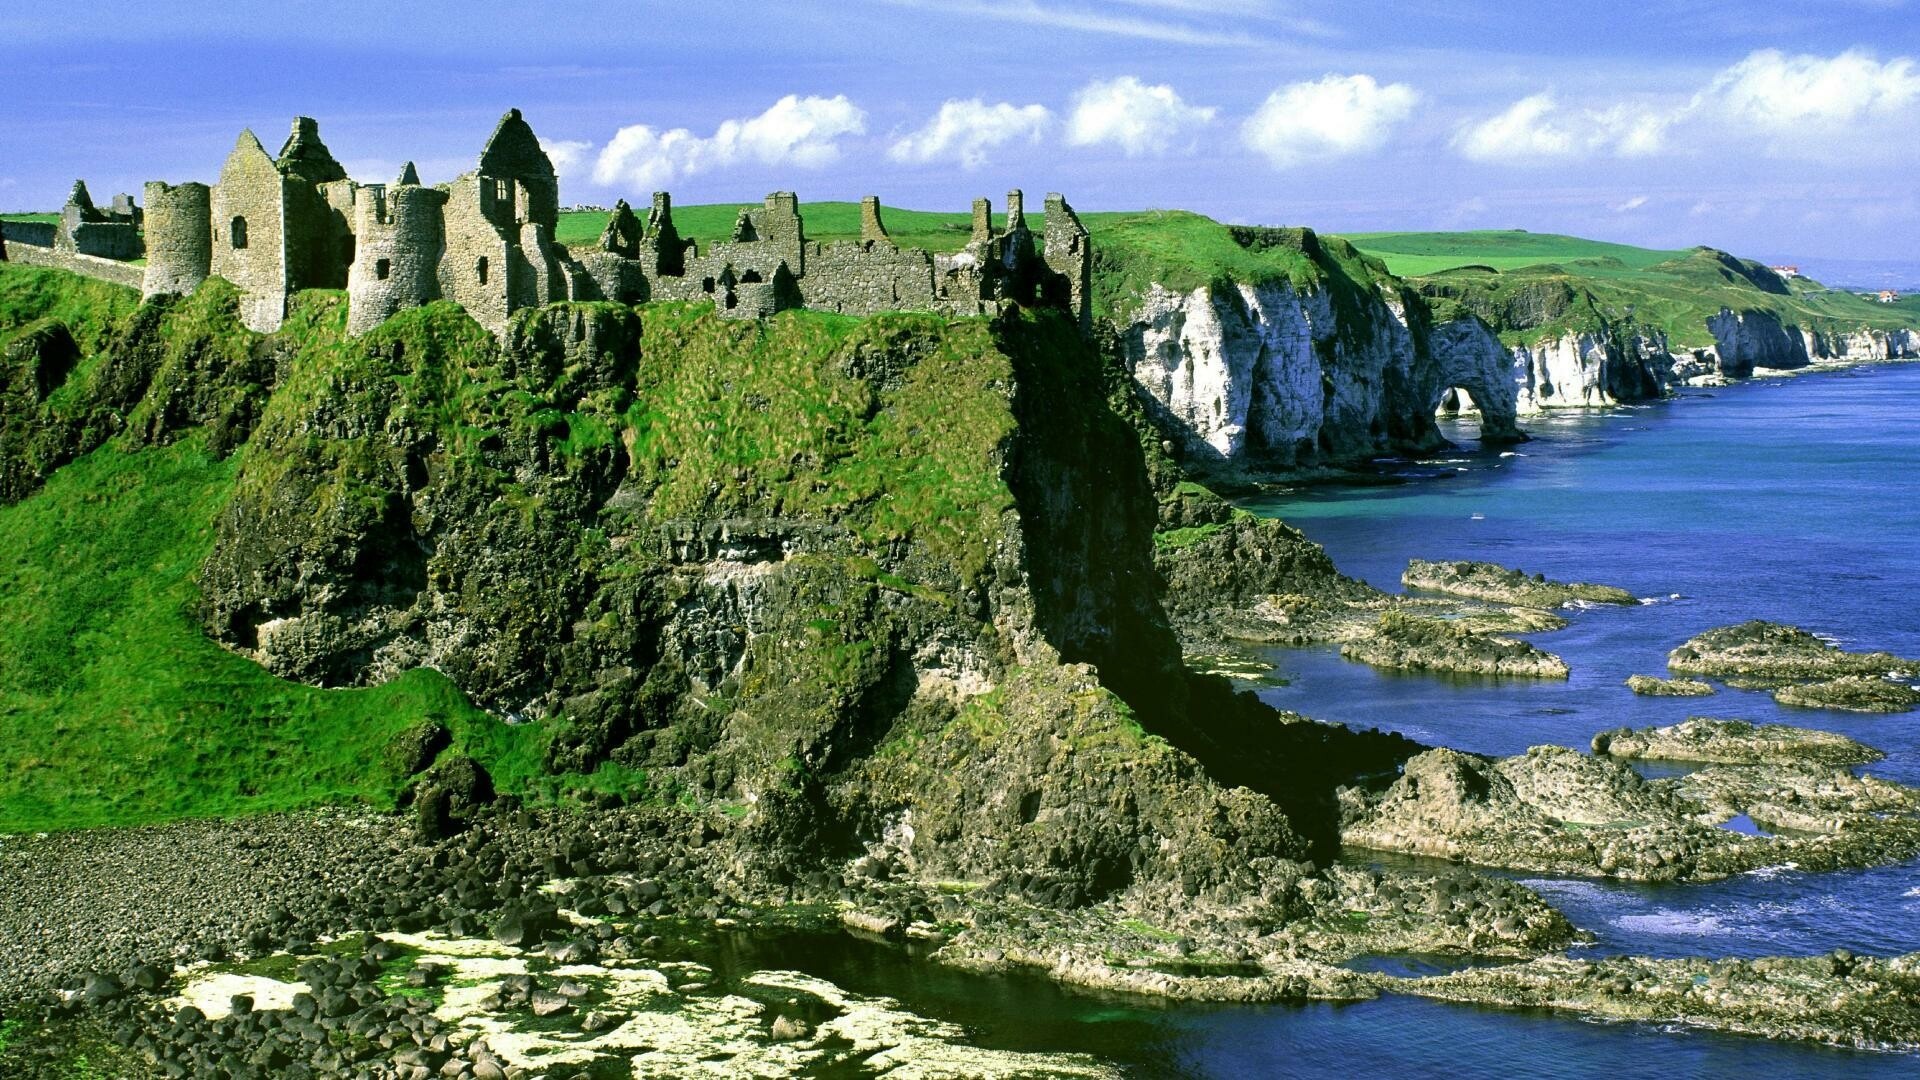 Northern Ireland: Dunluce Castle, Lough Neagh is the largest freshwater lake in the British Isles. 1920x1080 Full HD Wallpaper.